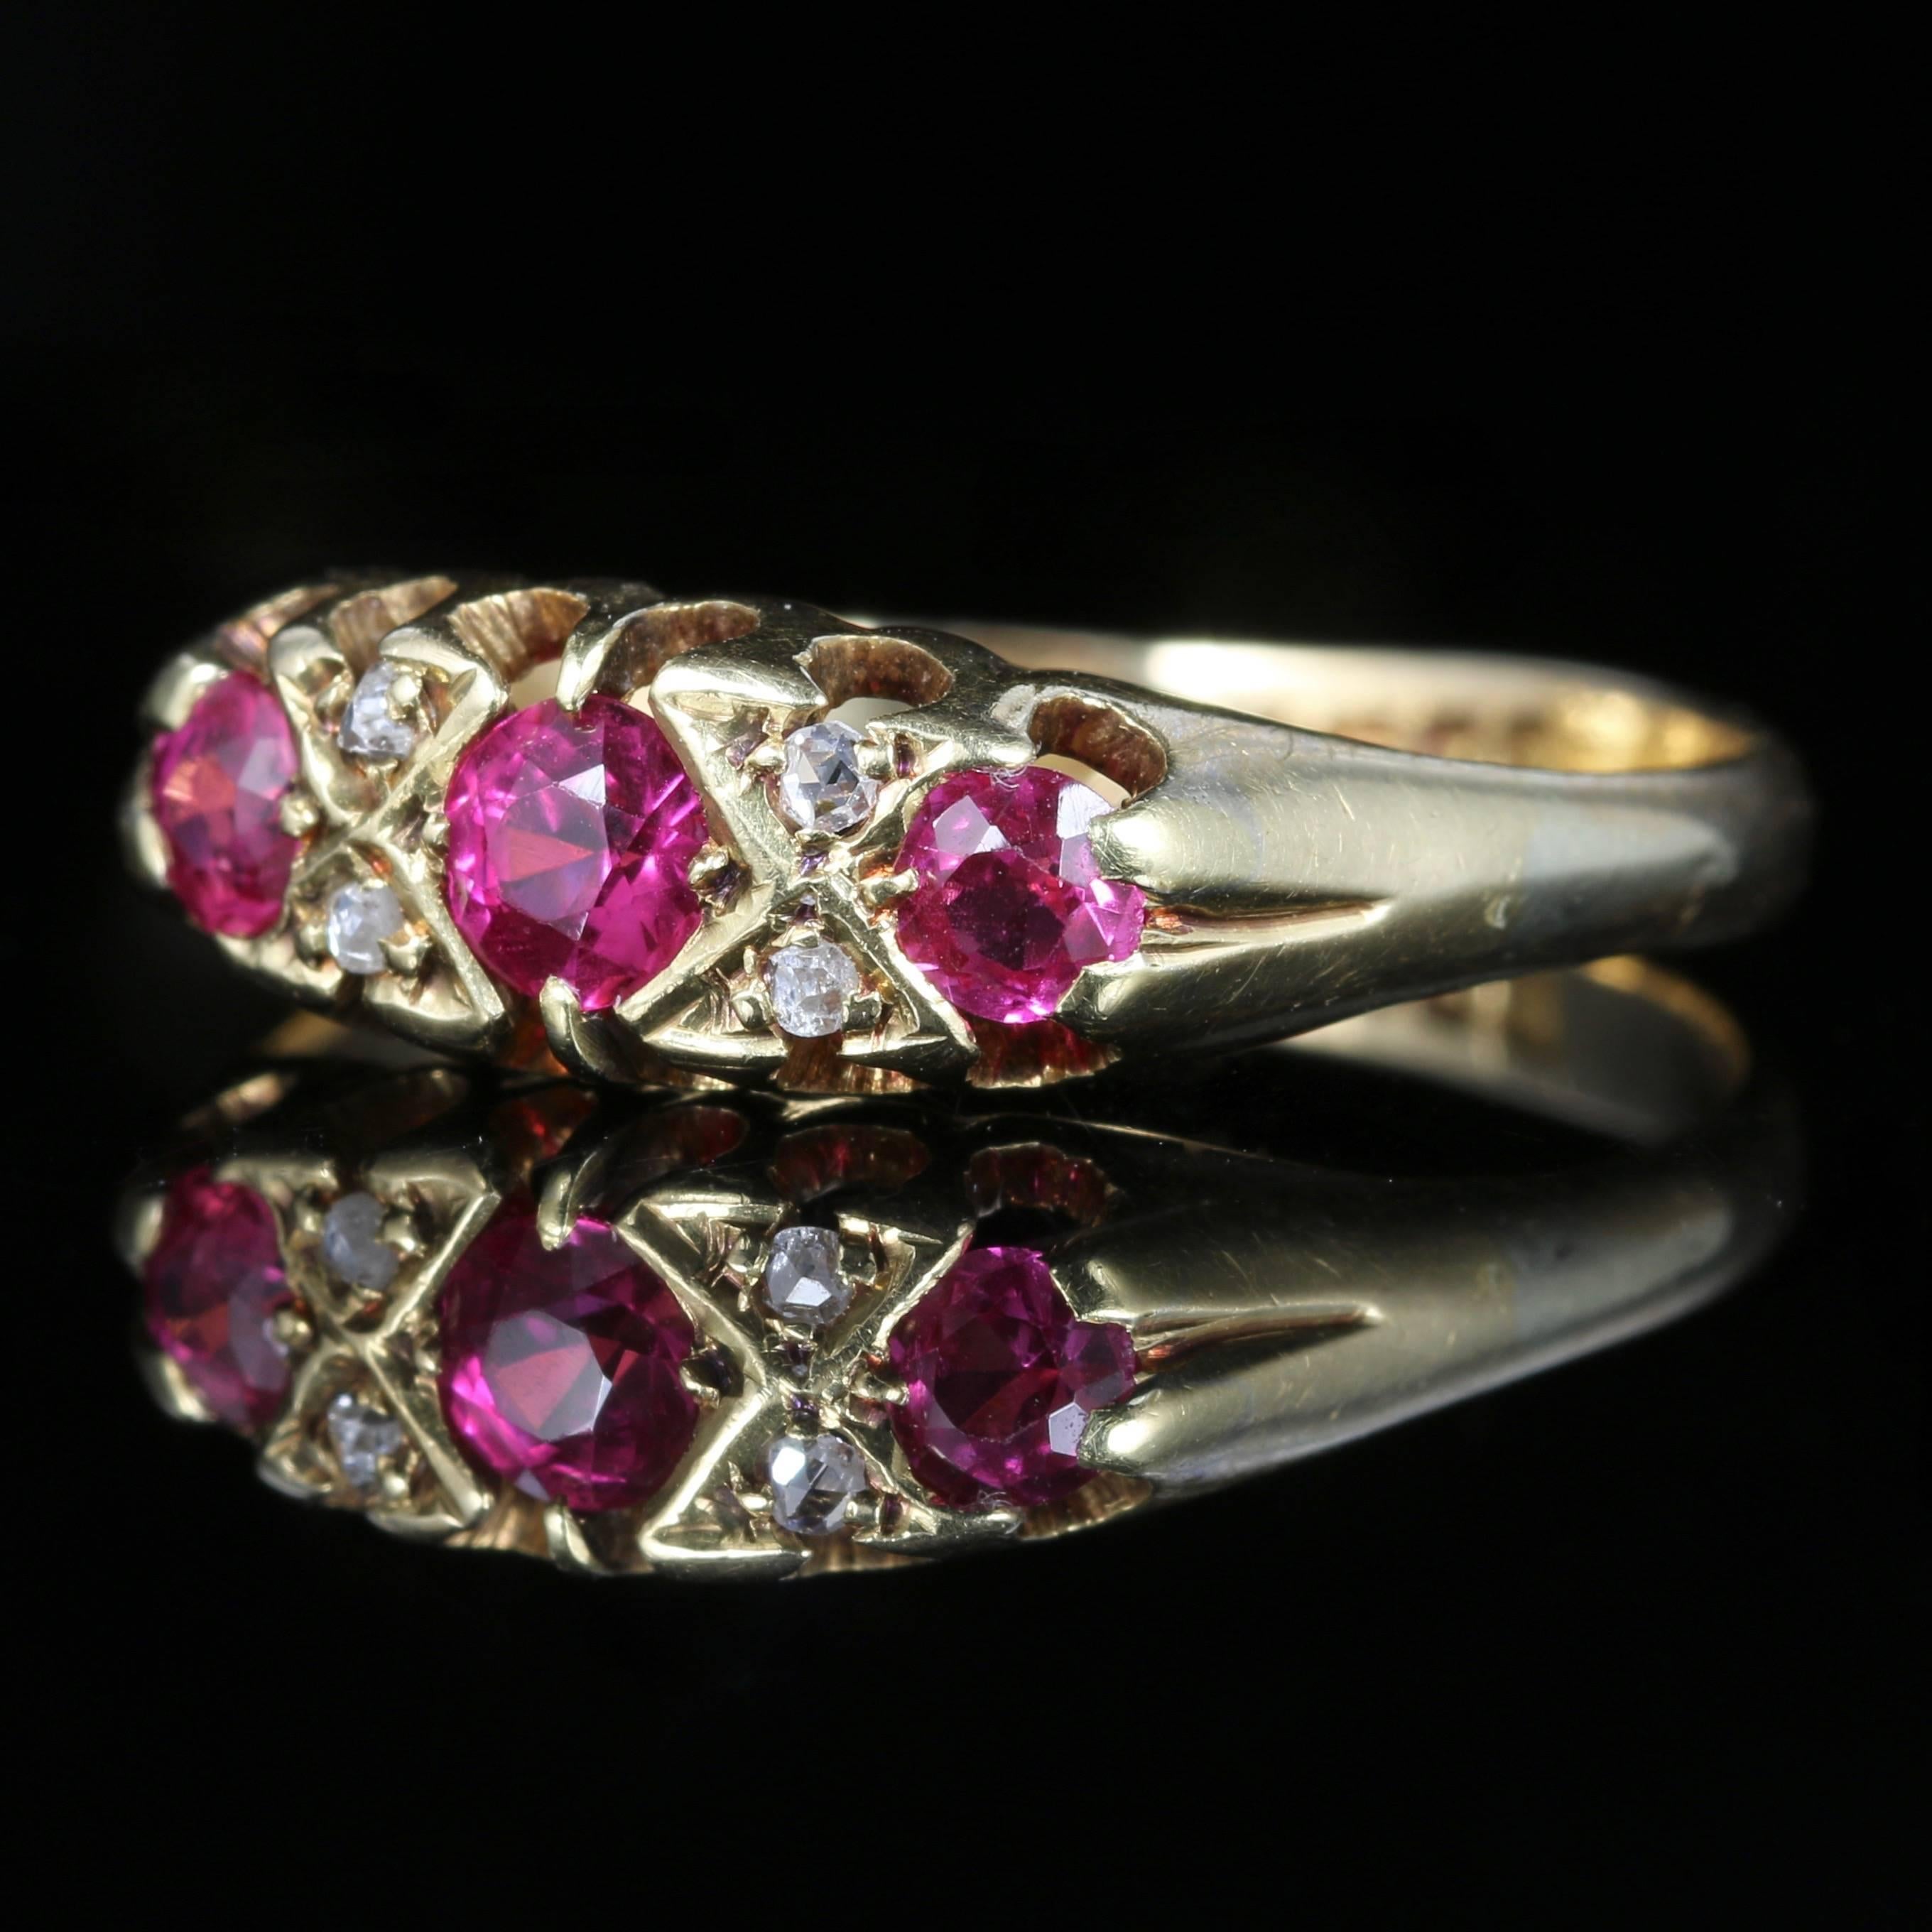 This fabulous 18ct Yellow Gold ring is fully hallmarked London 1869 

Set with a trilogy of Rubies, approx. 0.40ct in total. And 4 sparkling diamonds nestled in between. 

The Ruby is considered to be the most powerful gem of the universe, given as